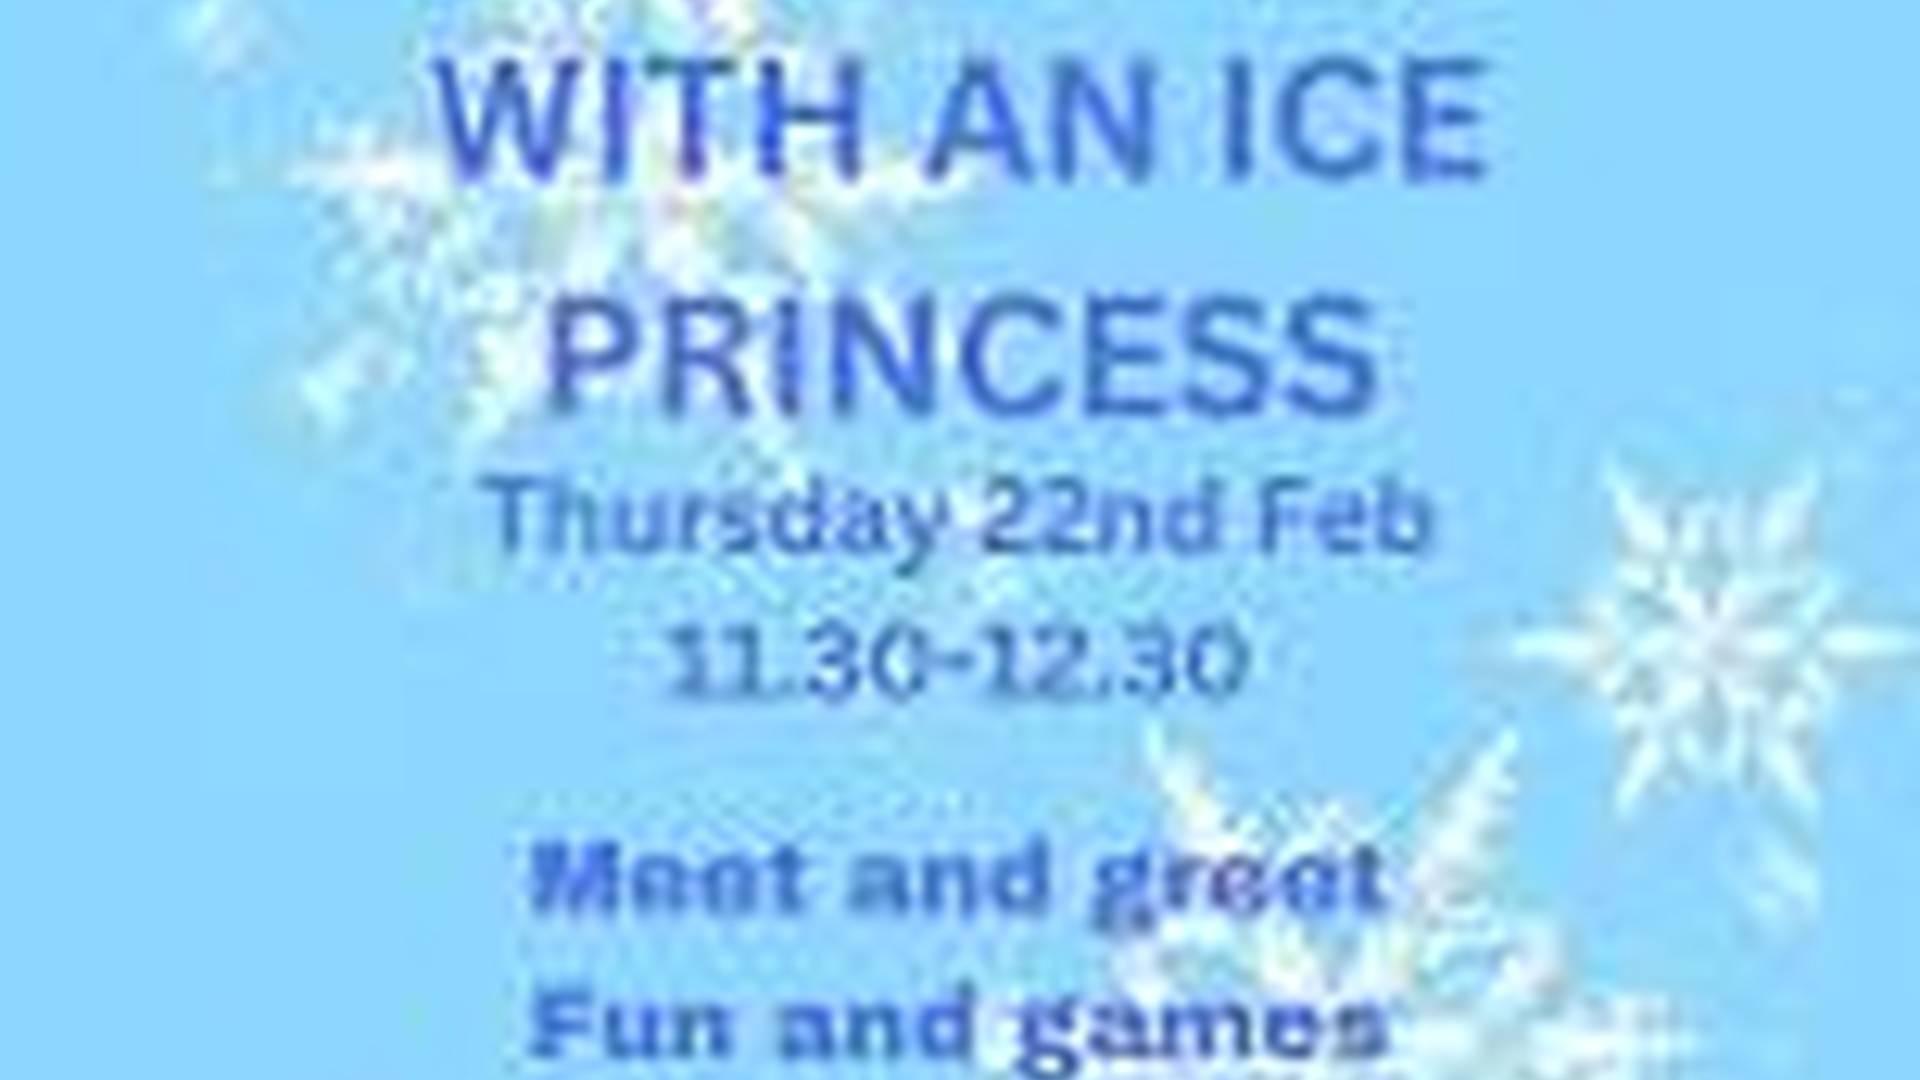 Afternoon tea with an ice princess - booking required photo